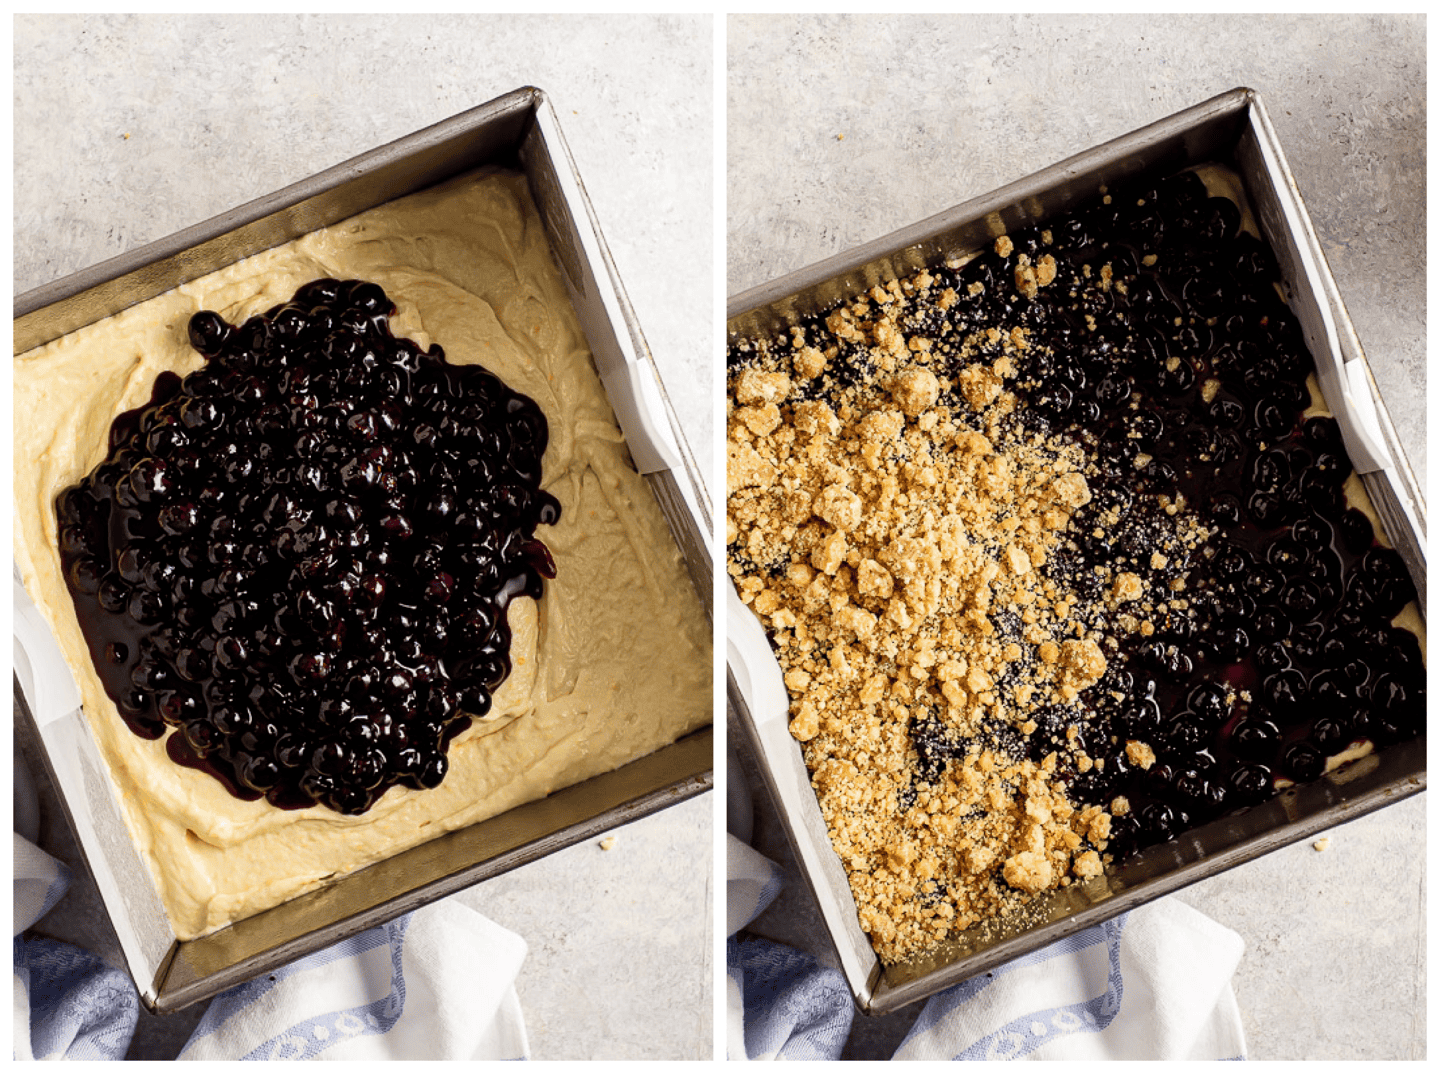 Image collage showing blueberry filling layered over cake batter and topped with streusel.